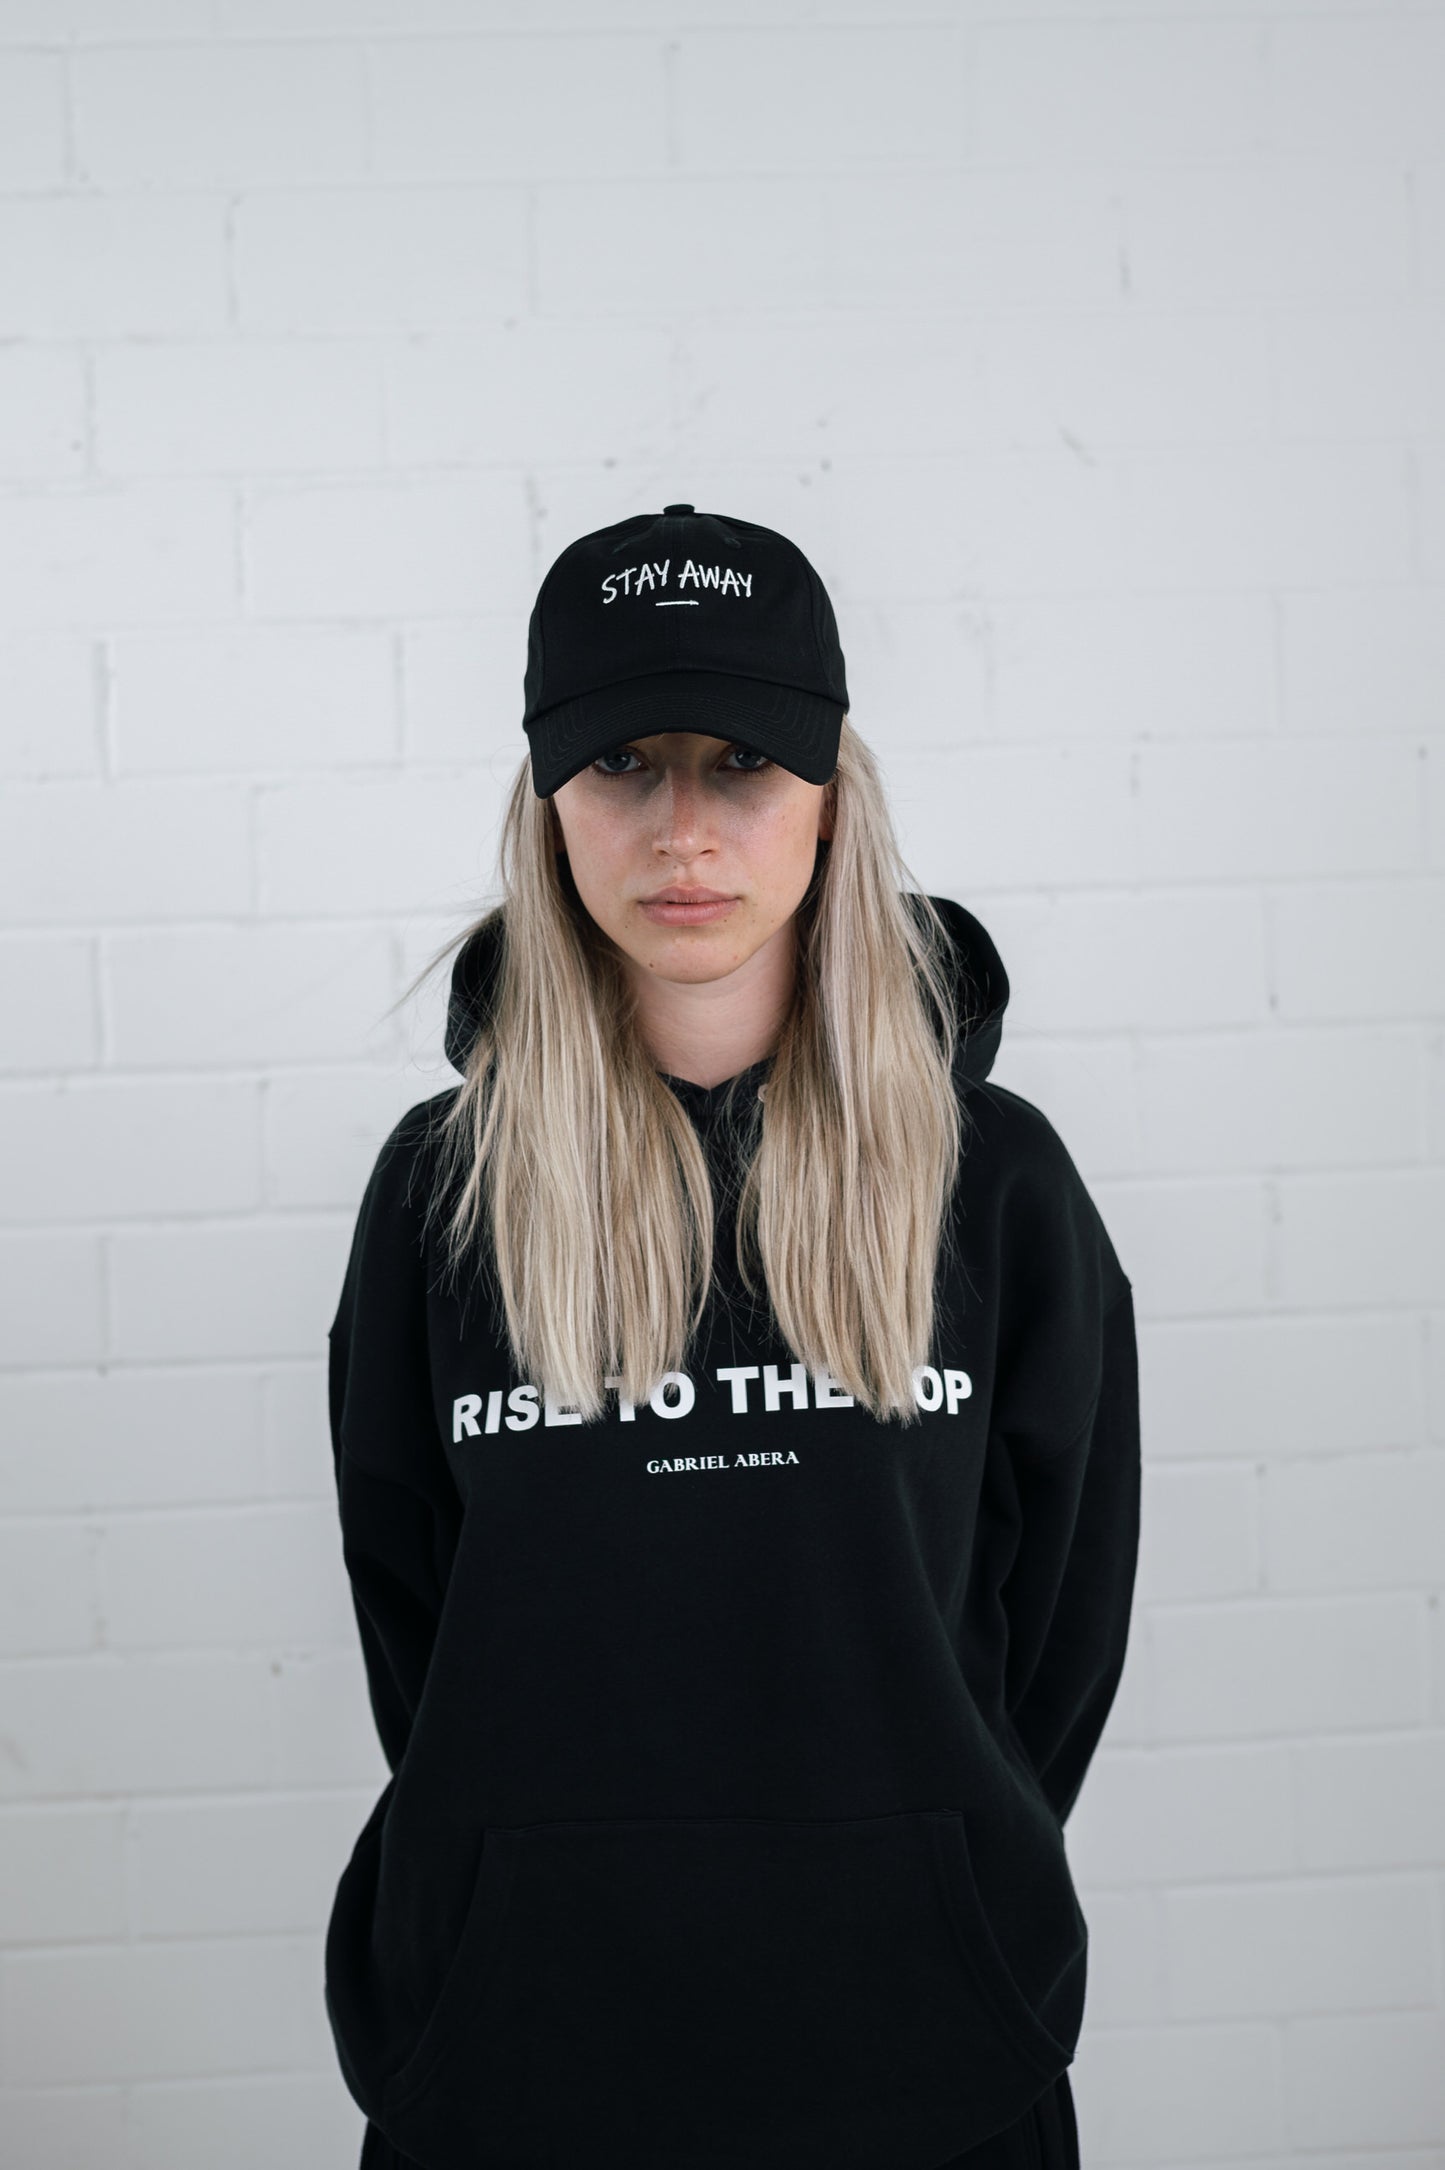 Female model wearing a Black cap with white stay away embroidery